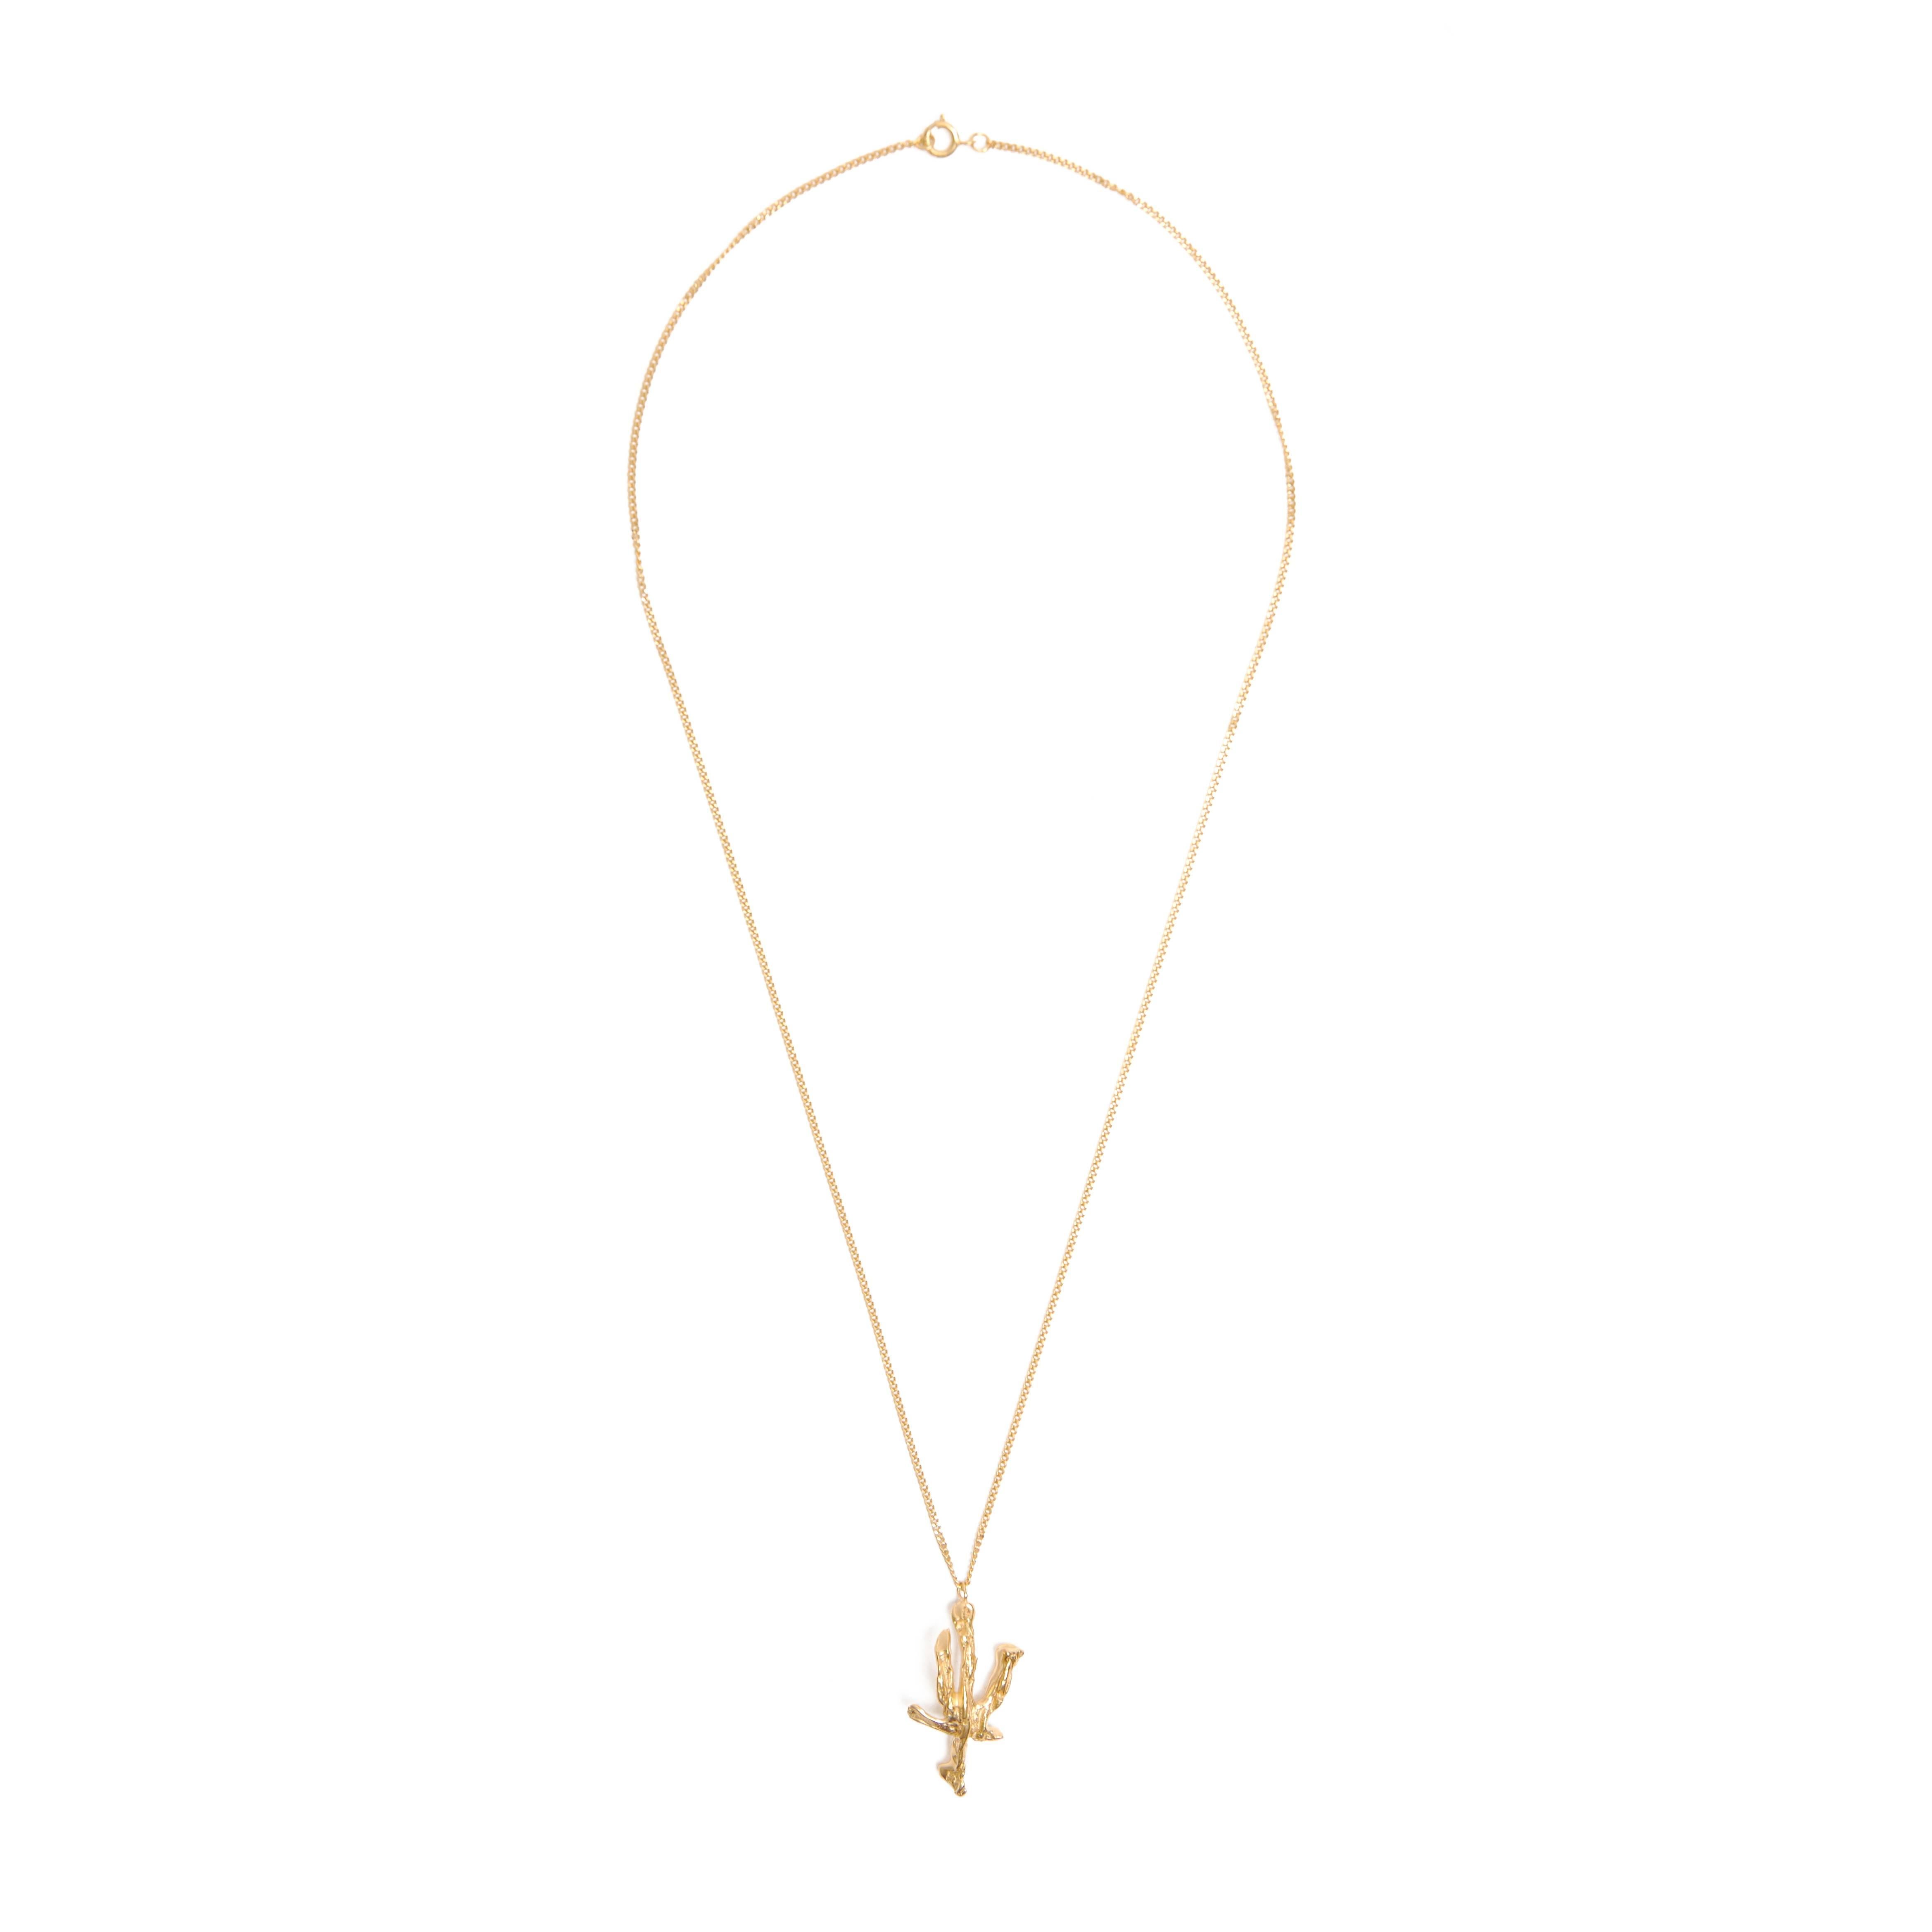 The Chinese zodiac Ox necklace is informed by the ancient Chinese calligraphy character of Ox (Niu 牛), the second of the twelve signs of the Chinese zodiac. The Ox sign is famed for its thoroughness and strength. Honest and trustworthy to the bone,